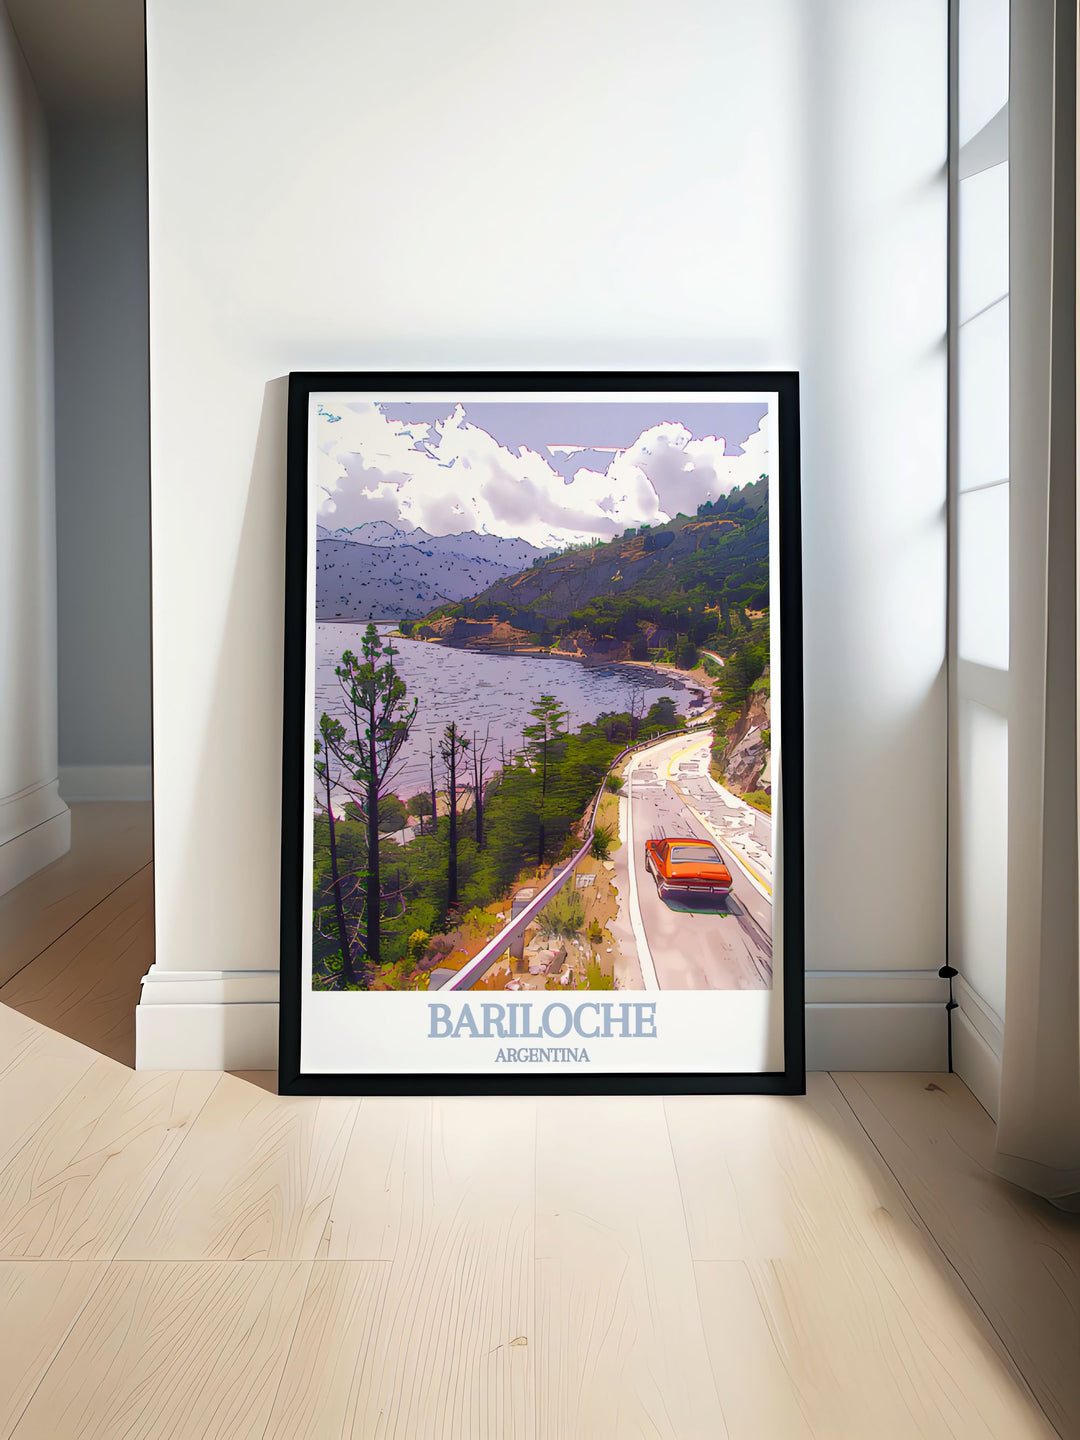 Stunning De Bariloche poster featuring the picturesque Route of the Seven Lakes and the charming town of San Carlos, capturing the natural beauty and unique charm of this iconic Argentine location. Perfect for adding a touch of Argentinas allure to your home decor.